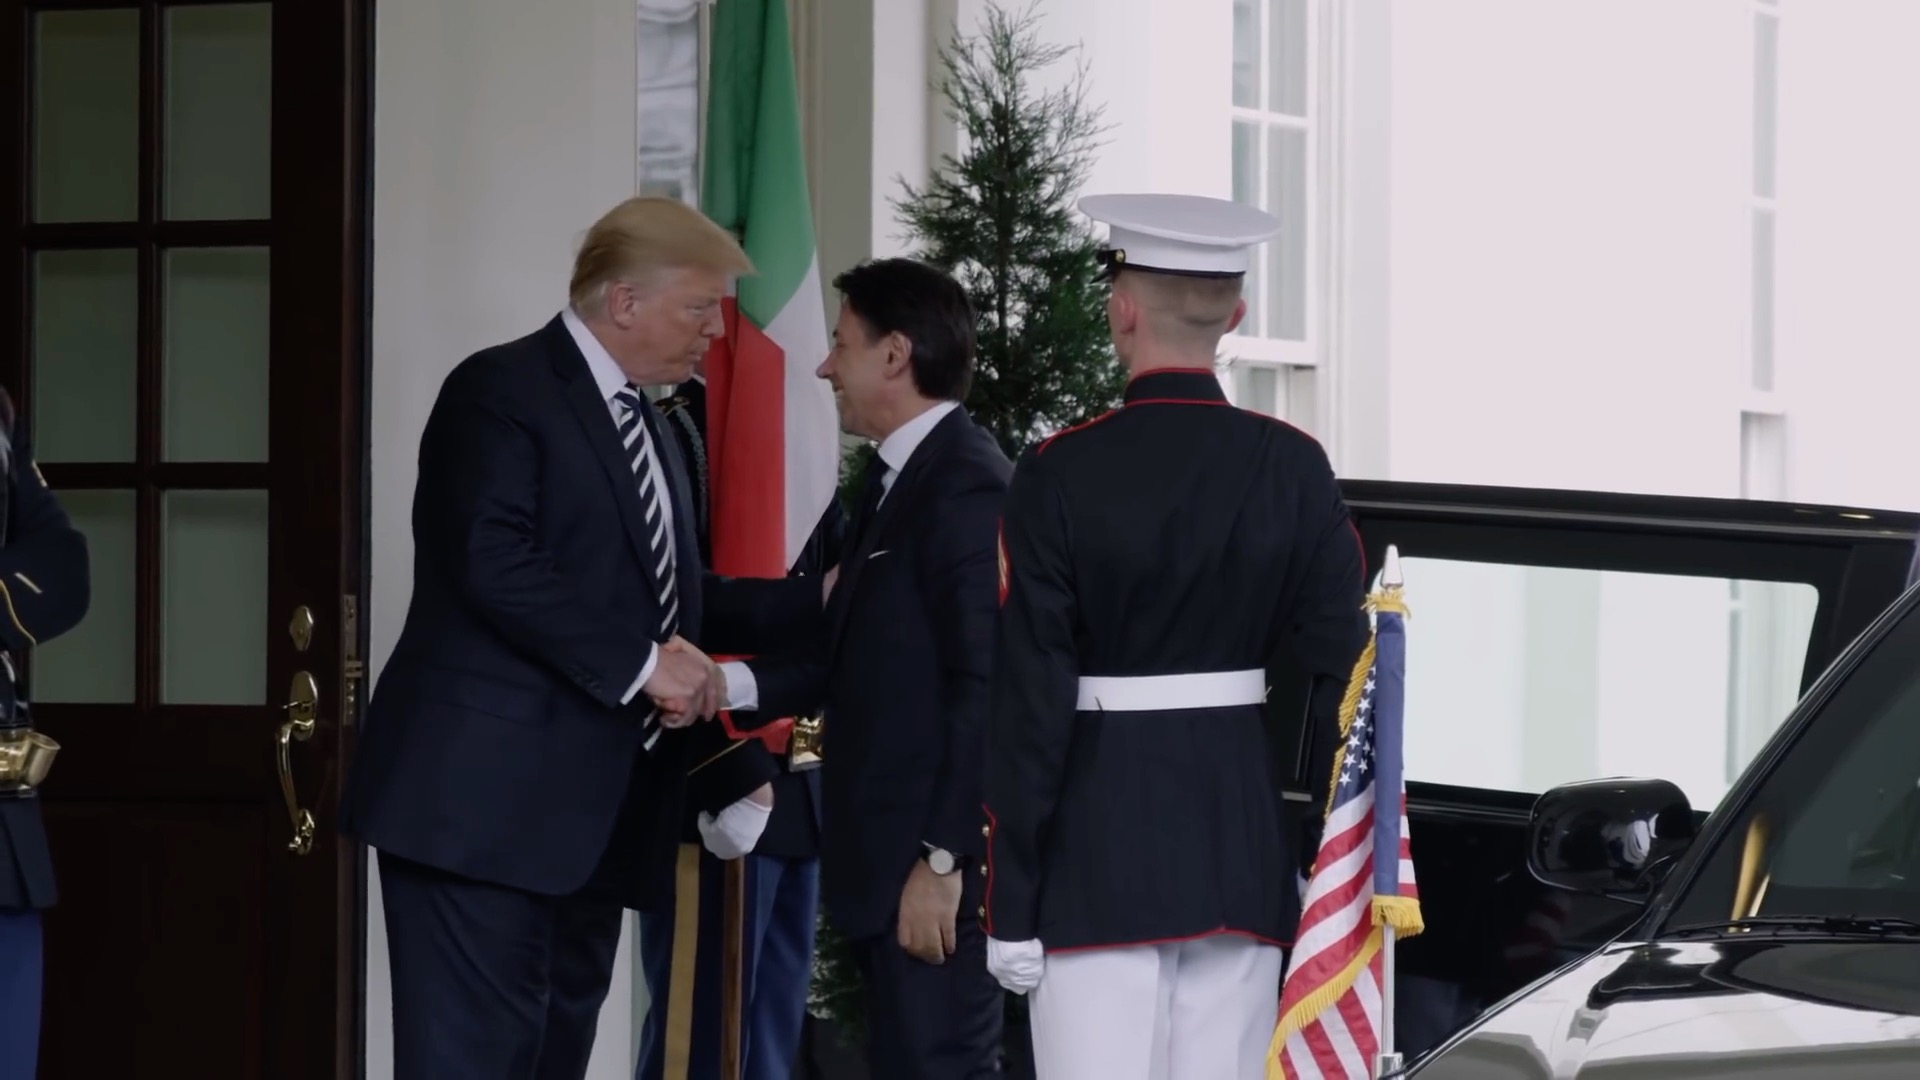 Italian Prime Minister Conte Welcomed In Style At The White House